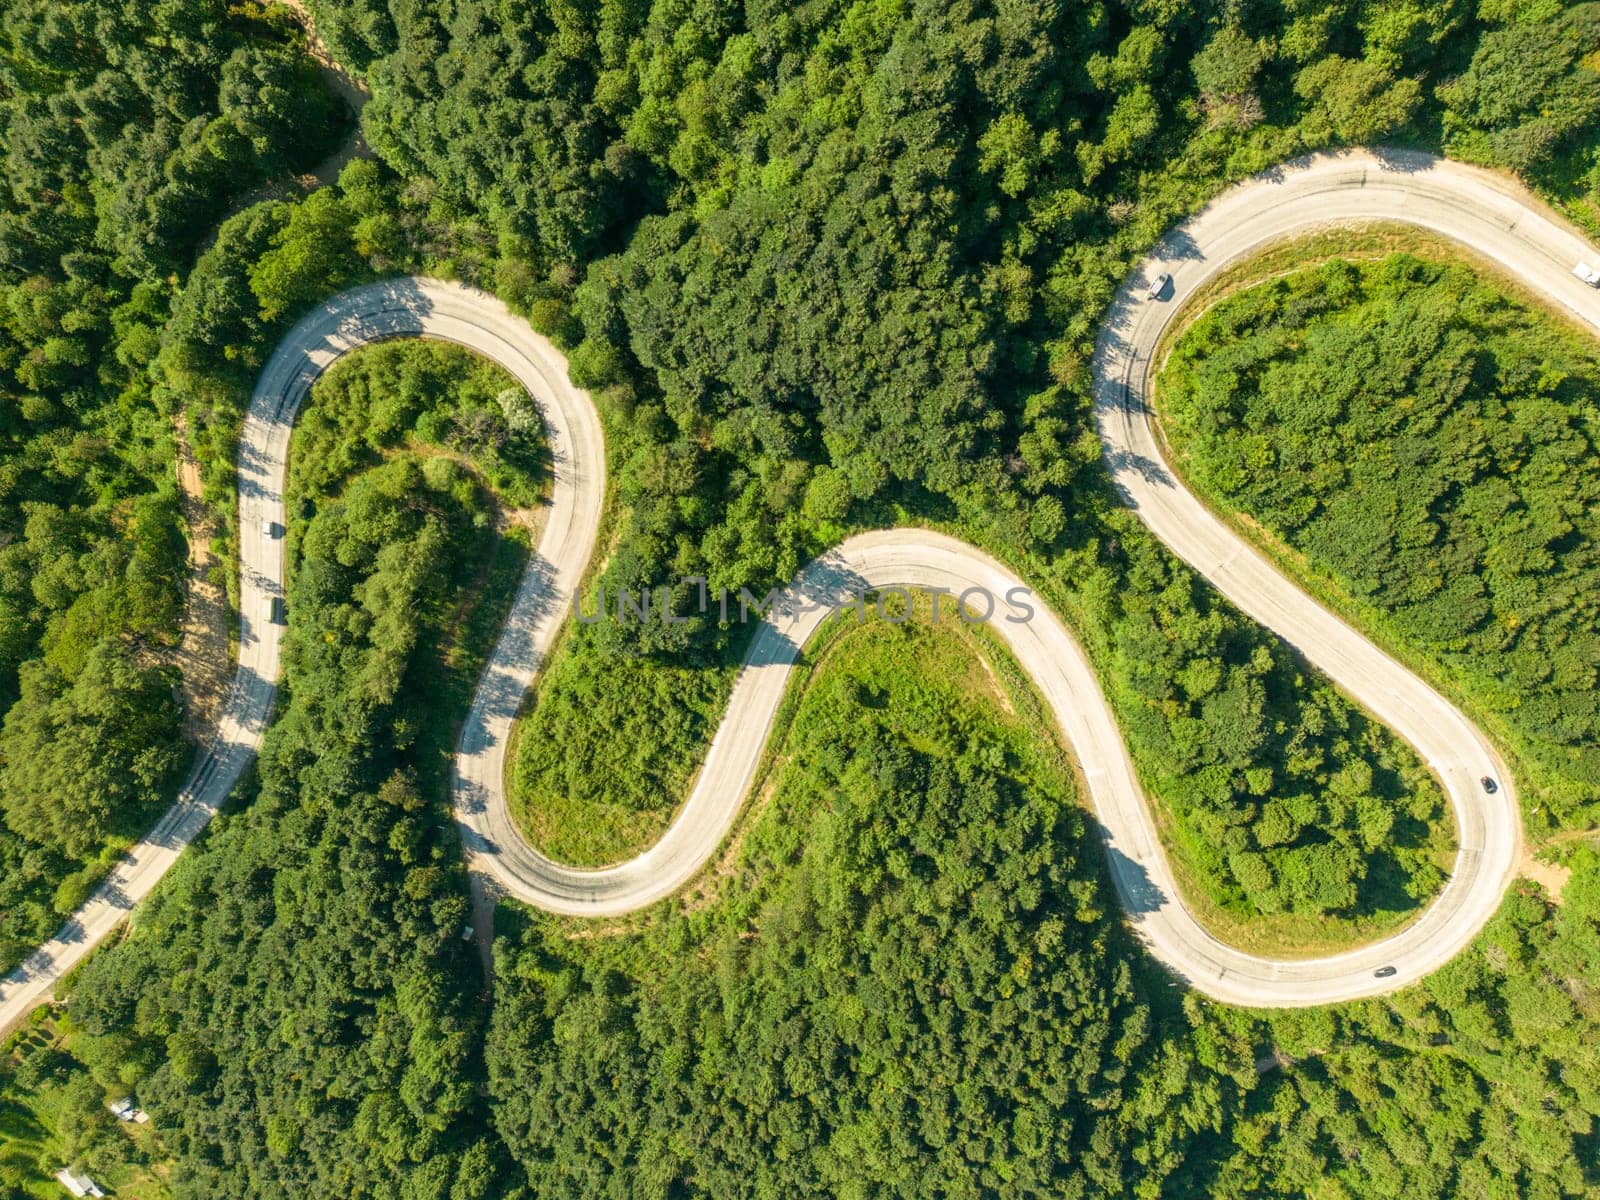 Drone view of the winding road from Domanic Town of Kutahya to Inegöl direction by Sonat